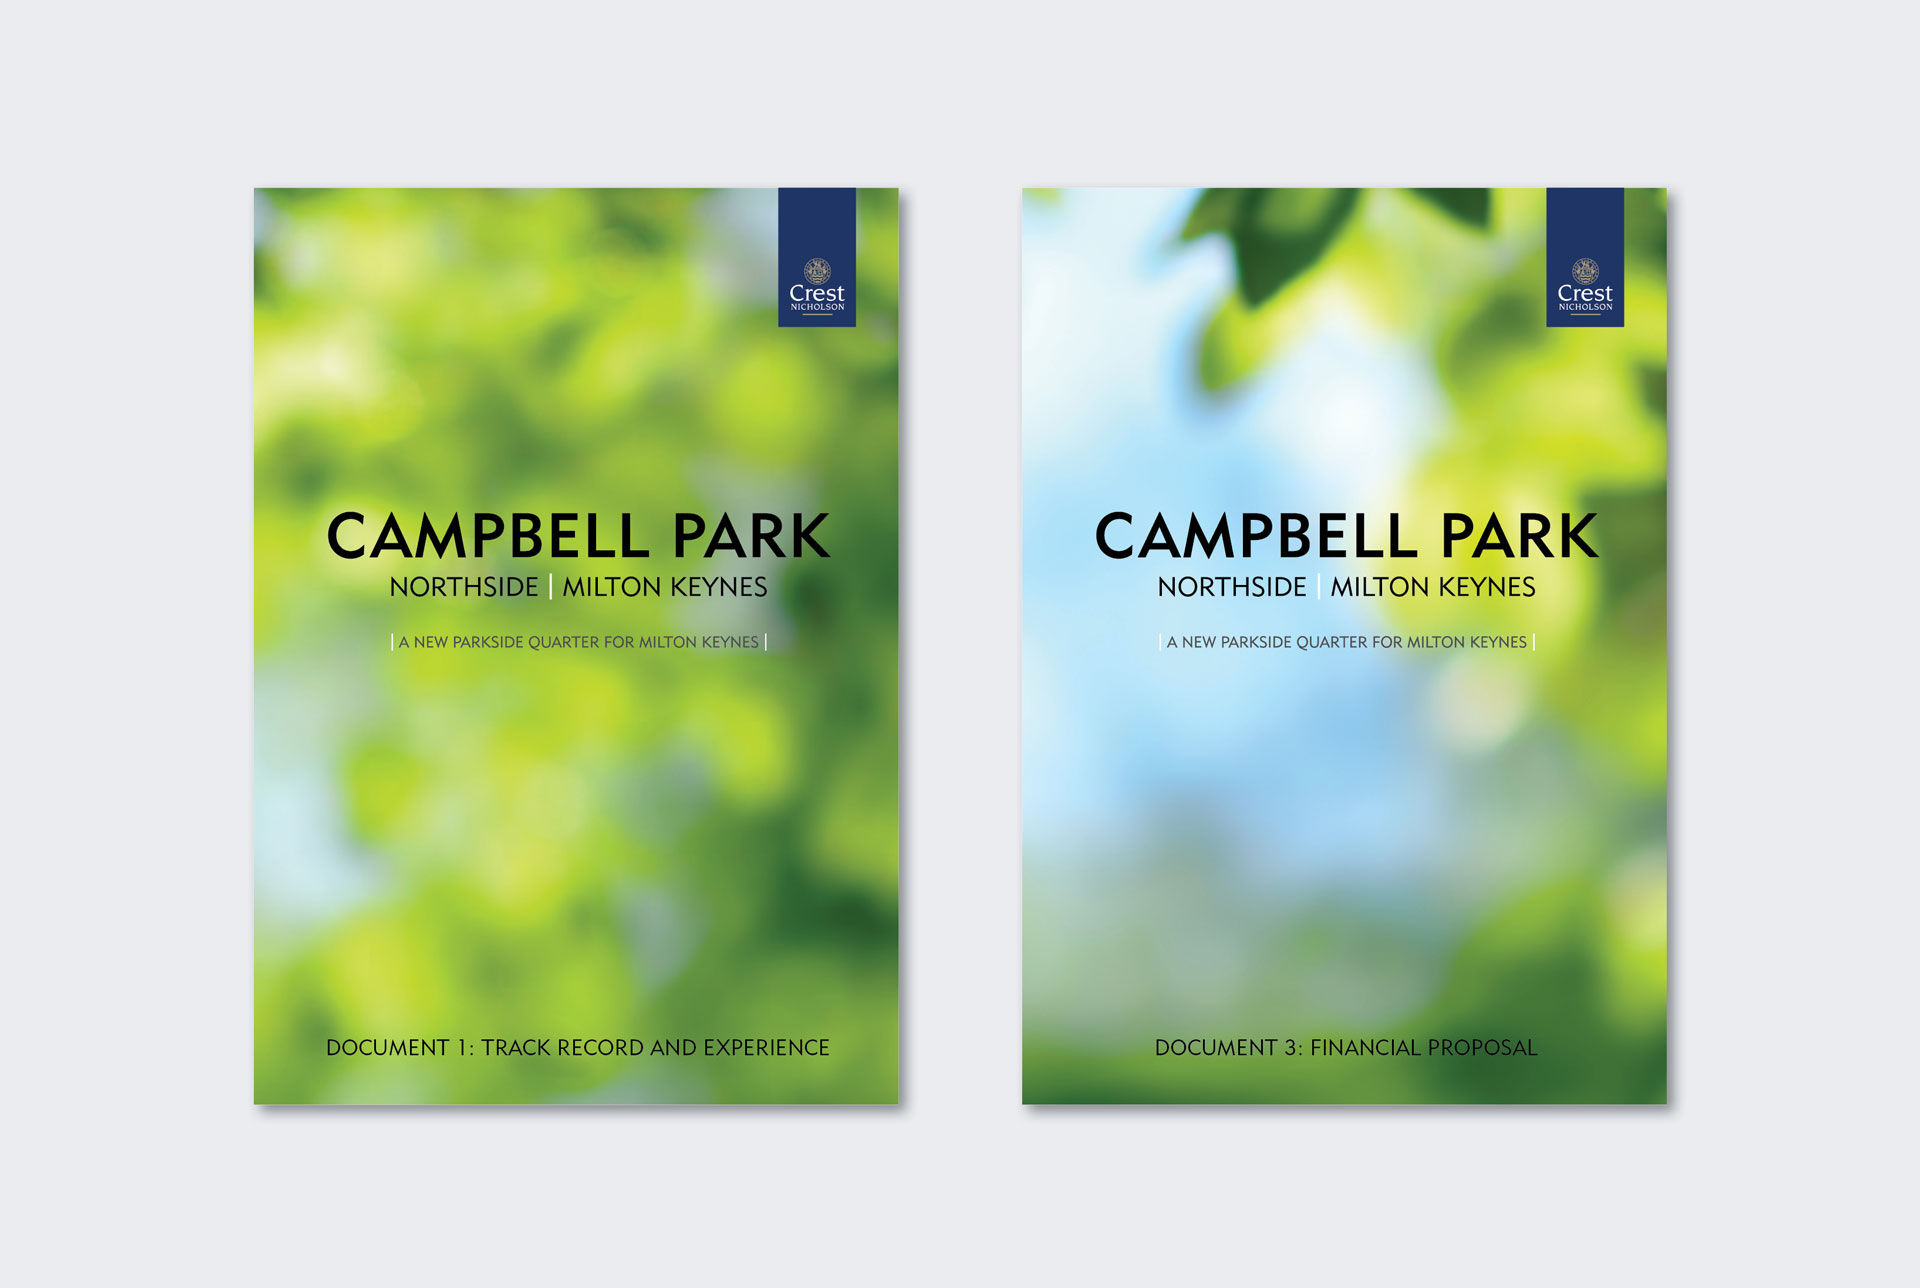 campbell-park-document-covers.jpg